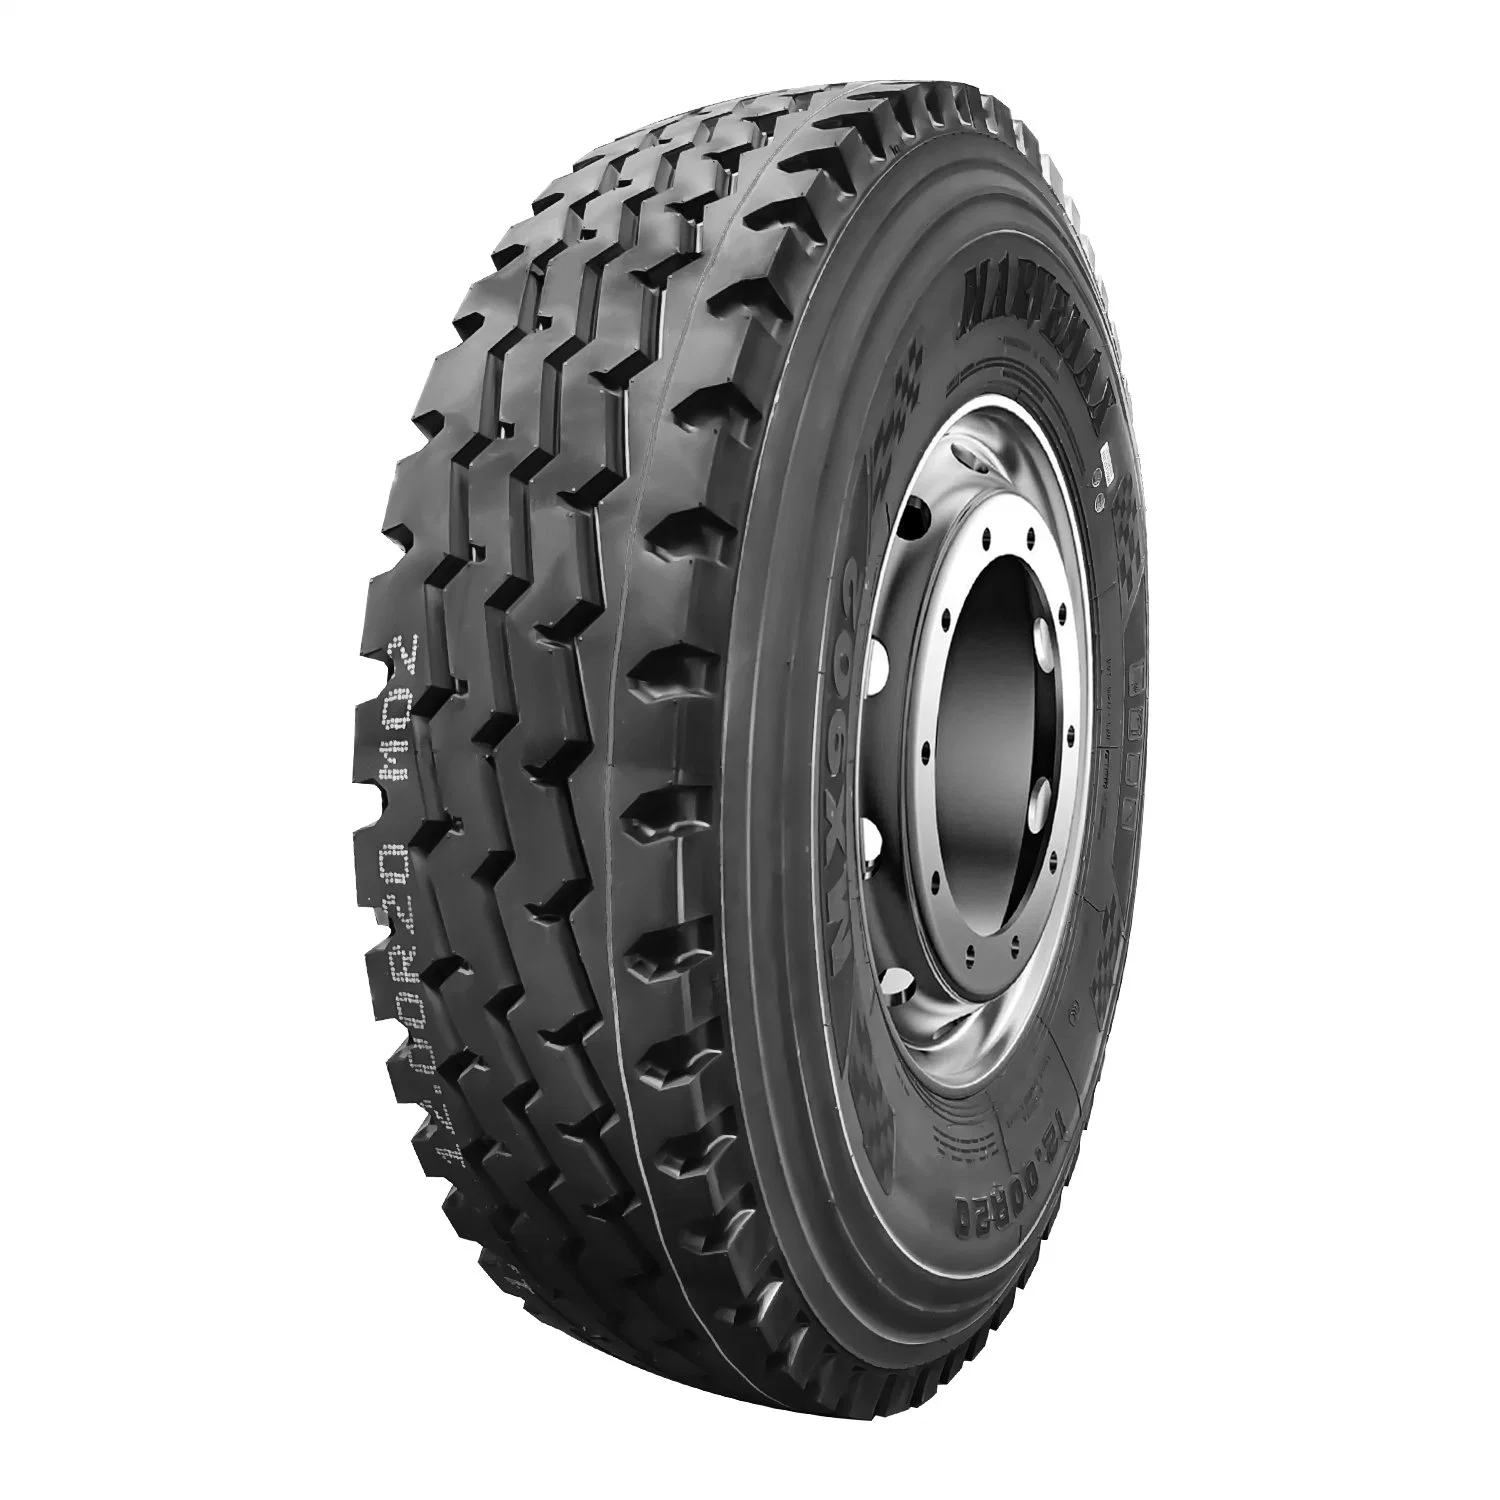 TBR Tyres Truck Tire11.00r20 Spare Tire Truck and Bus Radial Tyre